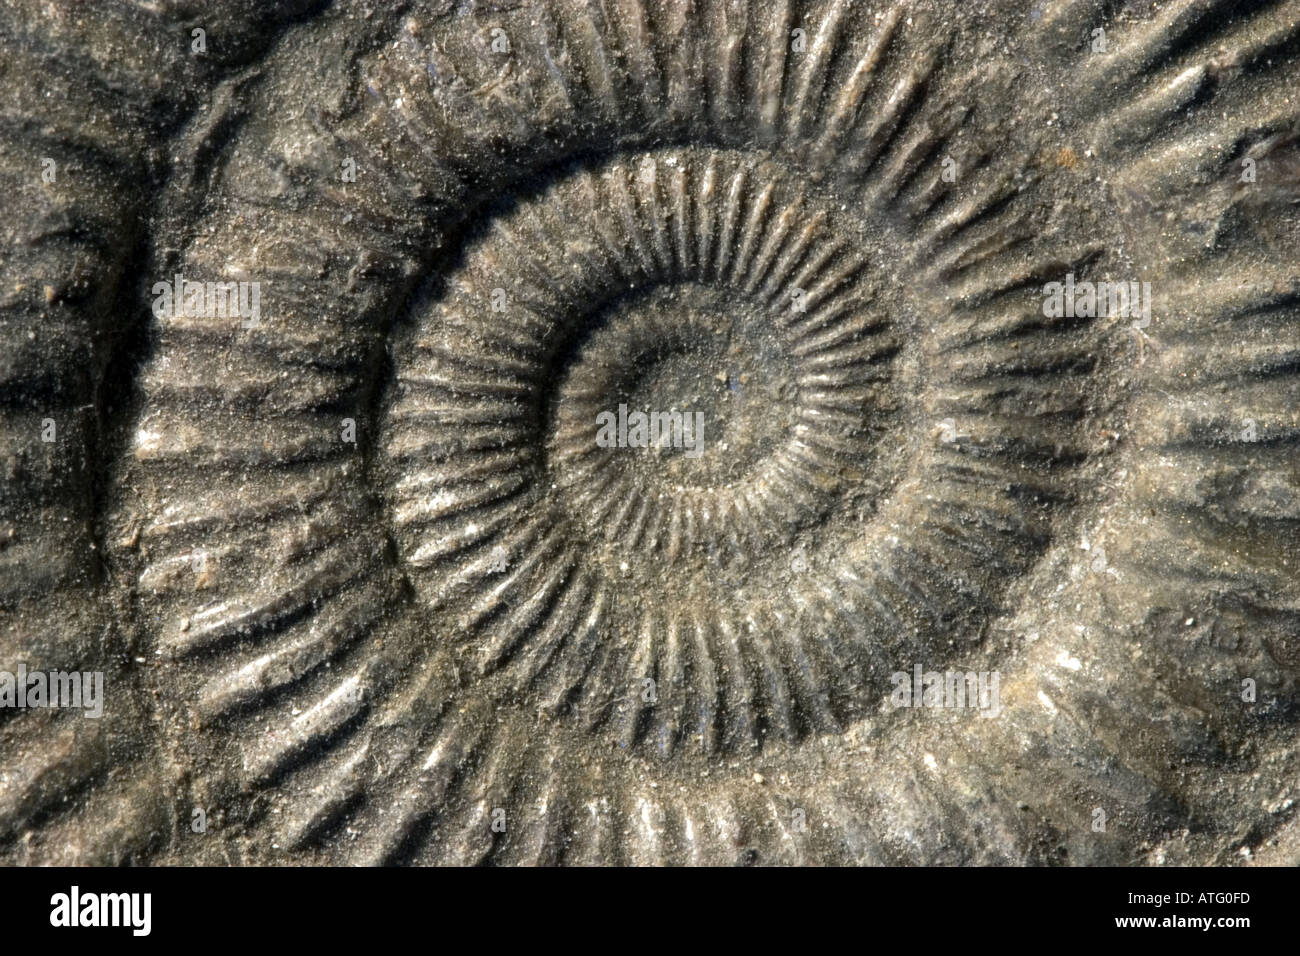 Close up view of ammonite from triassic period Stock Photo